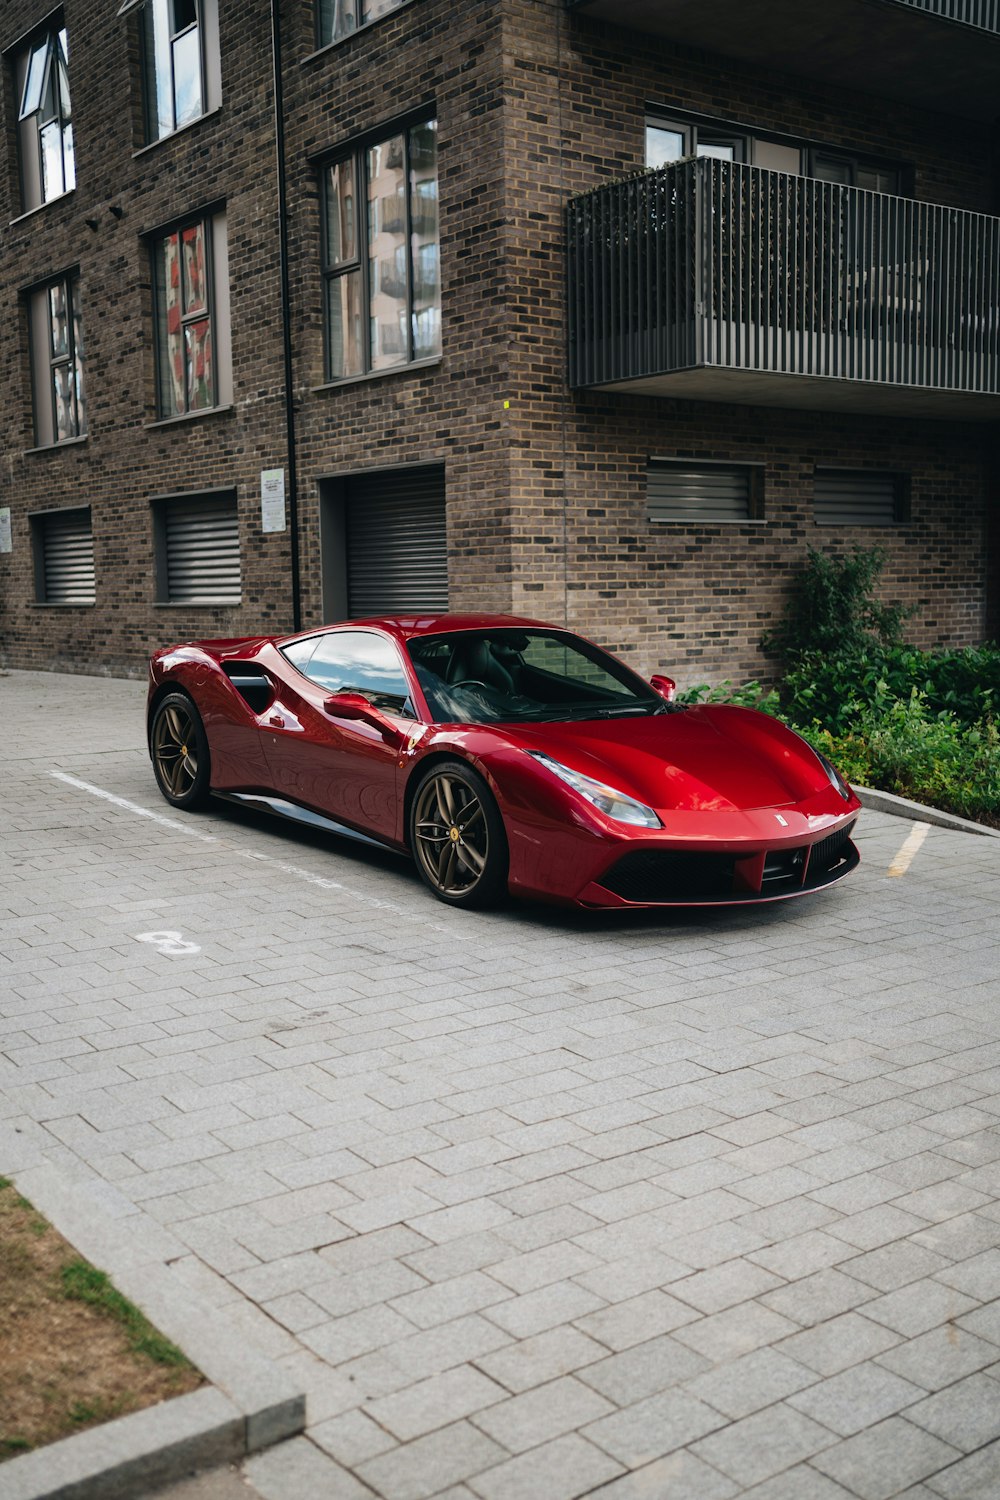 a red sports car parked in front of a brick building